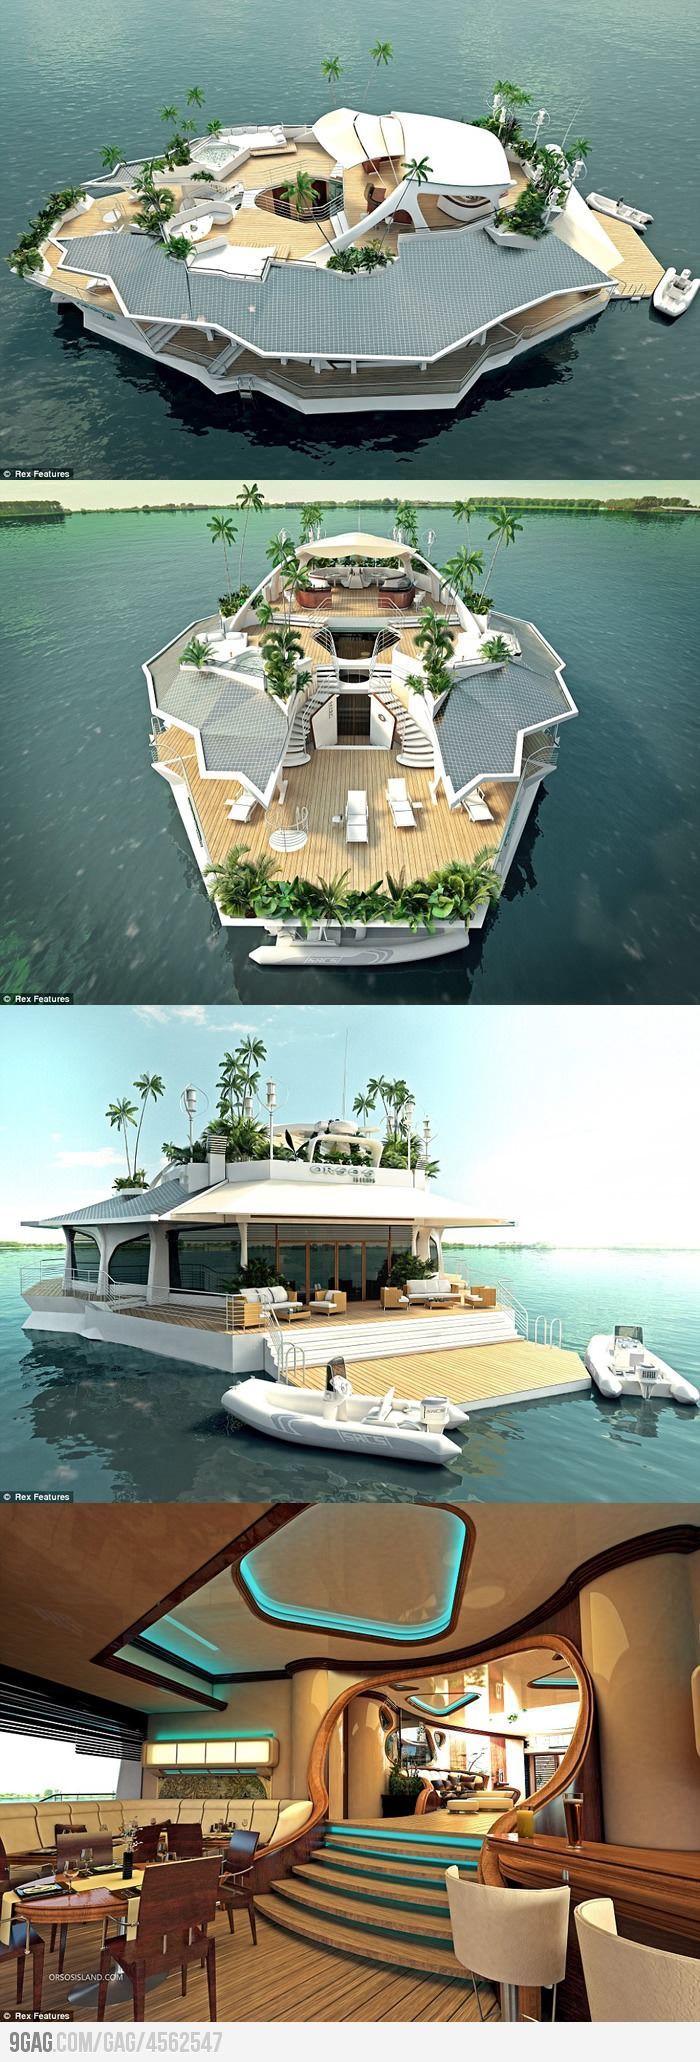 VACATION HOUSE BOAT